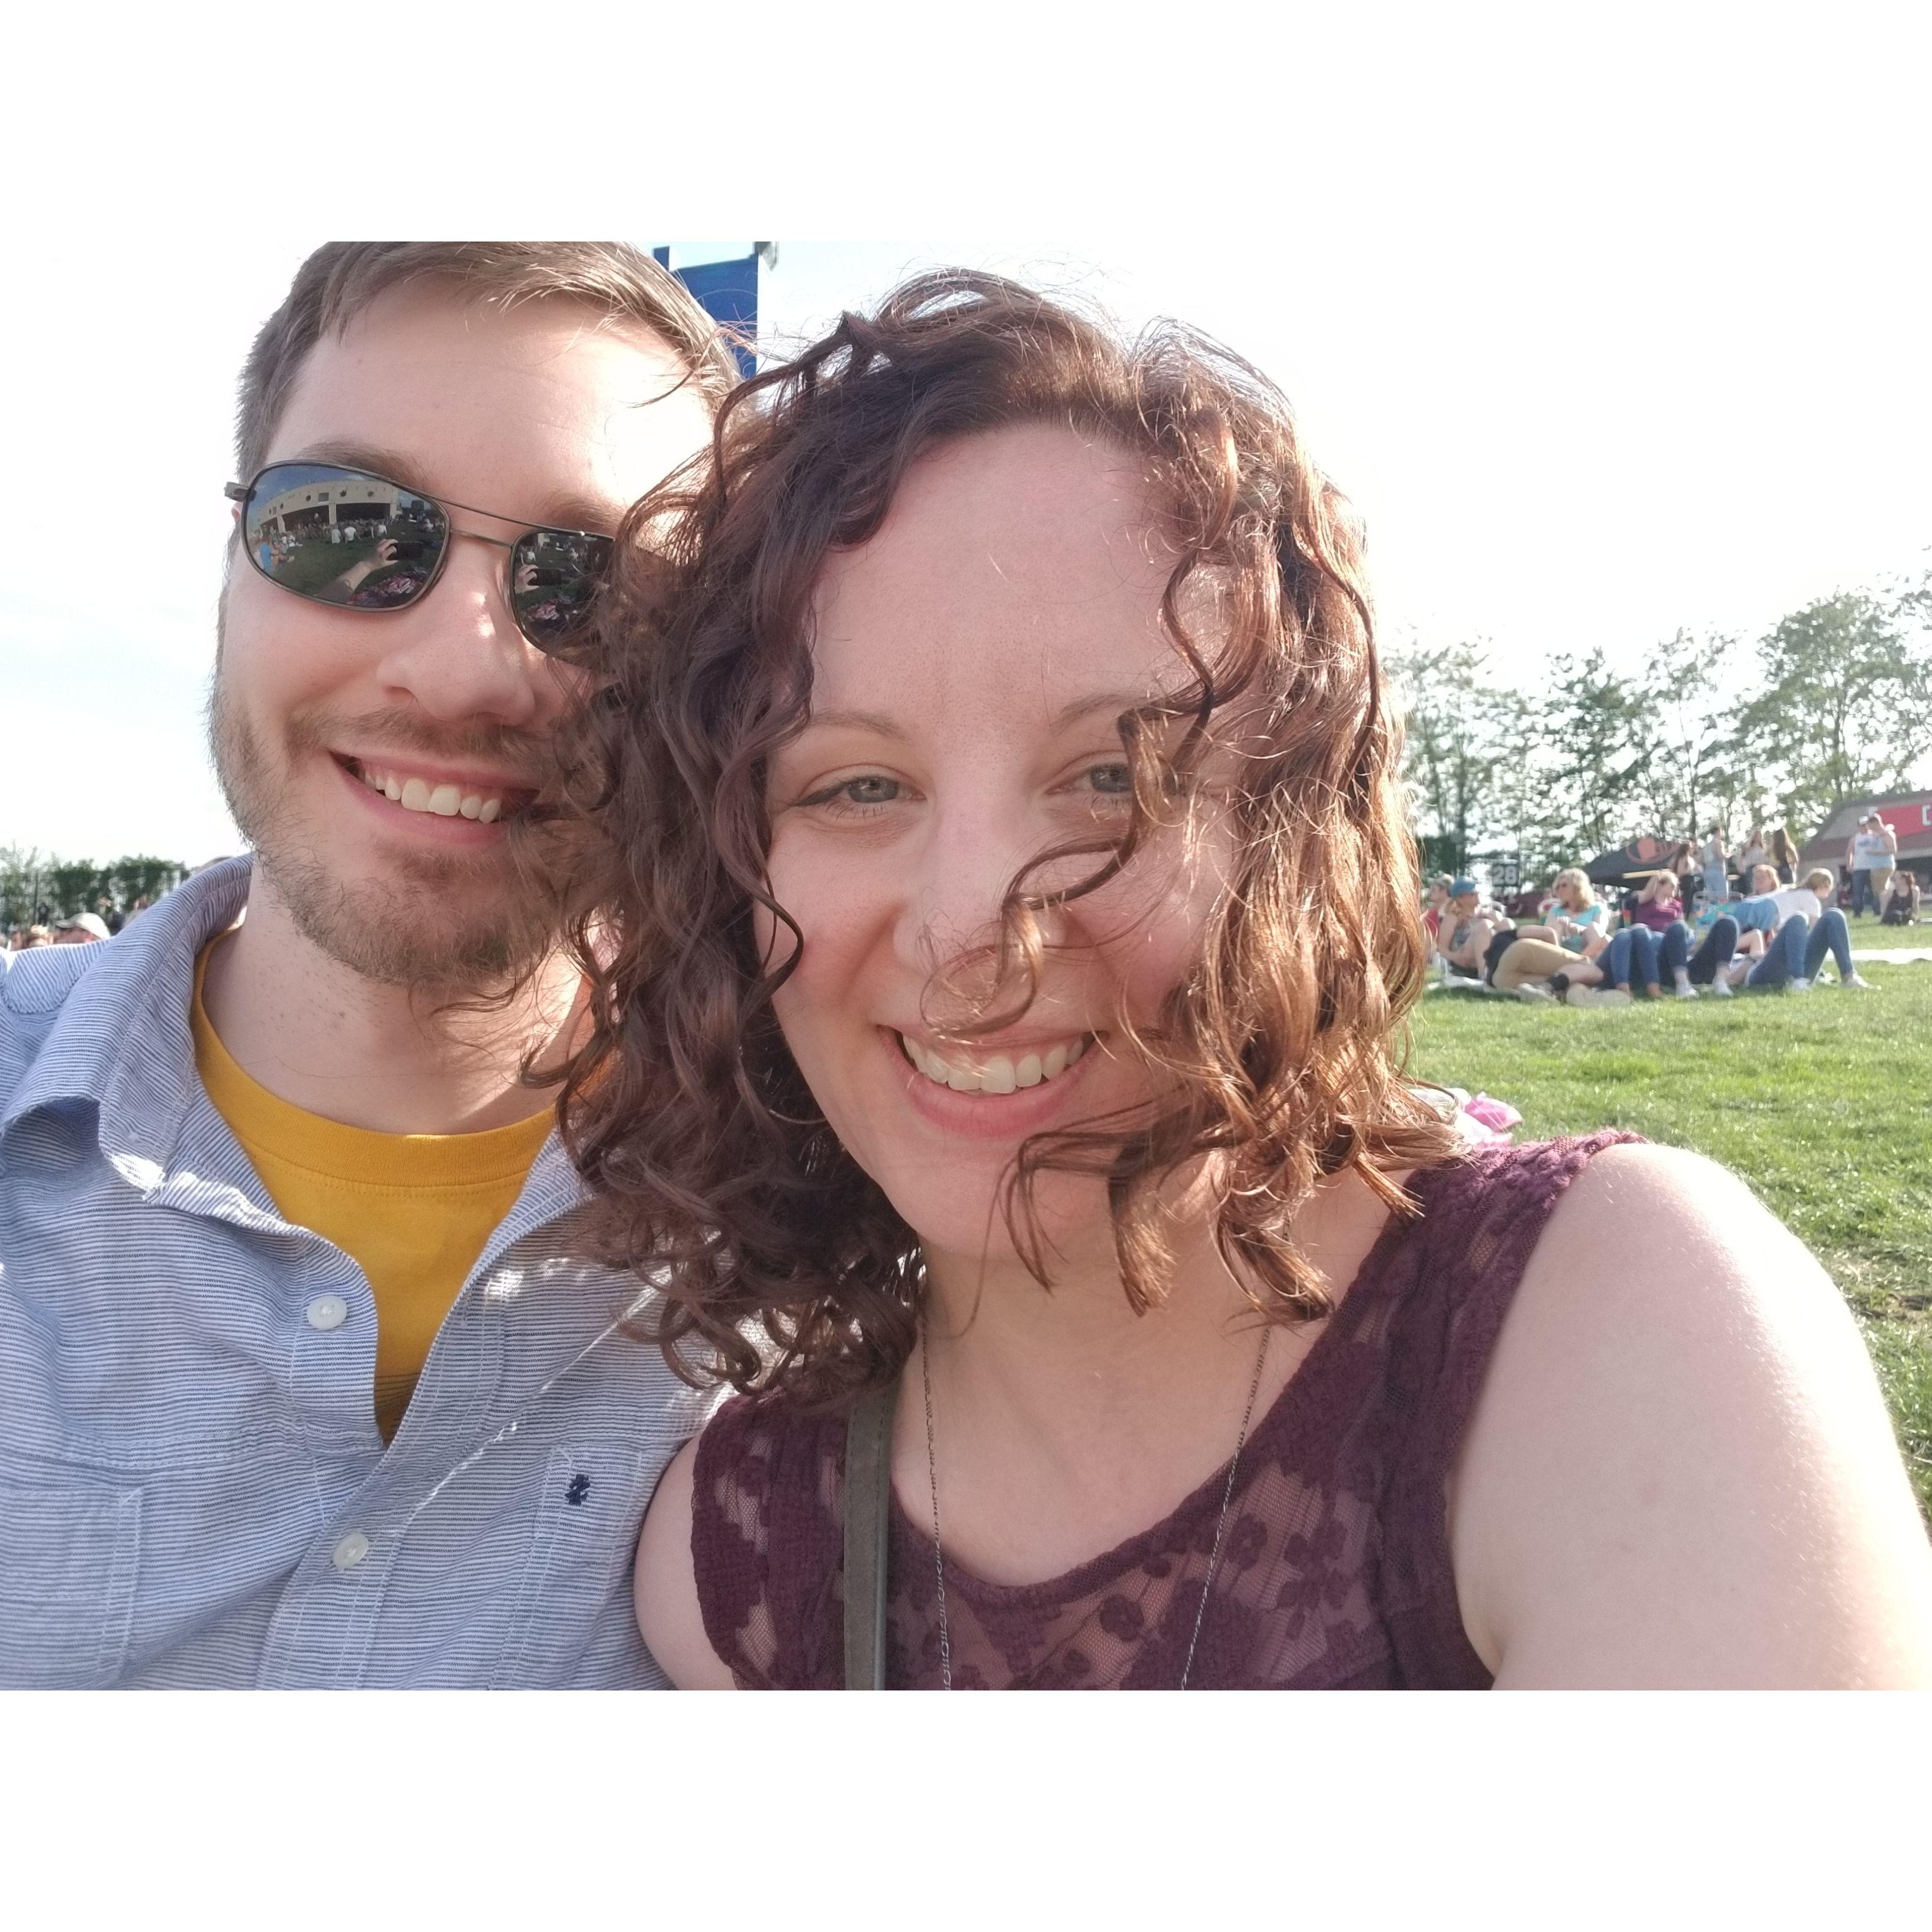 Enjoying a concert out on the lawn together